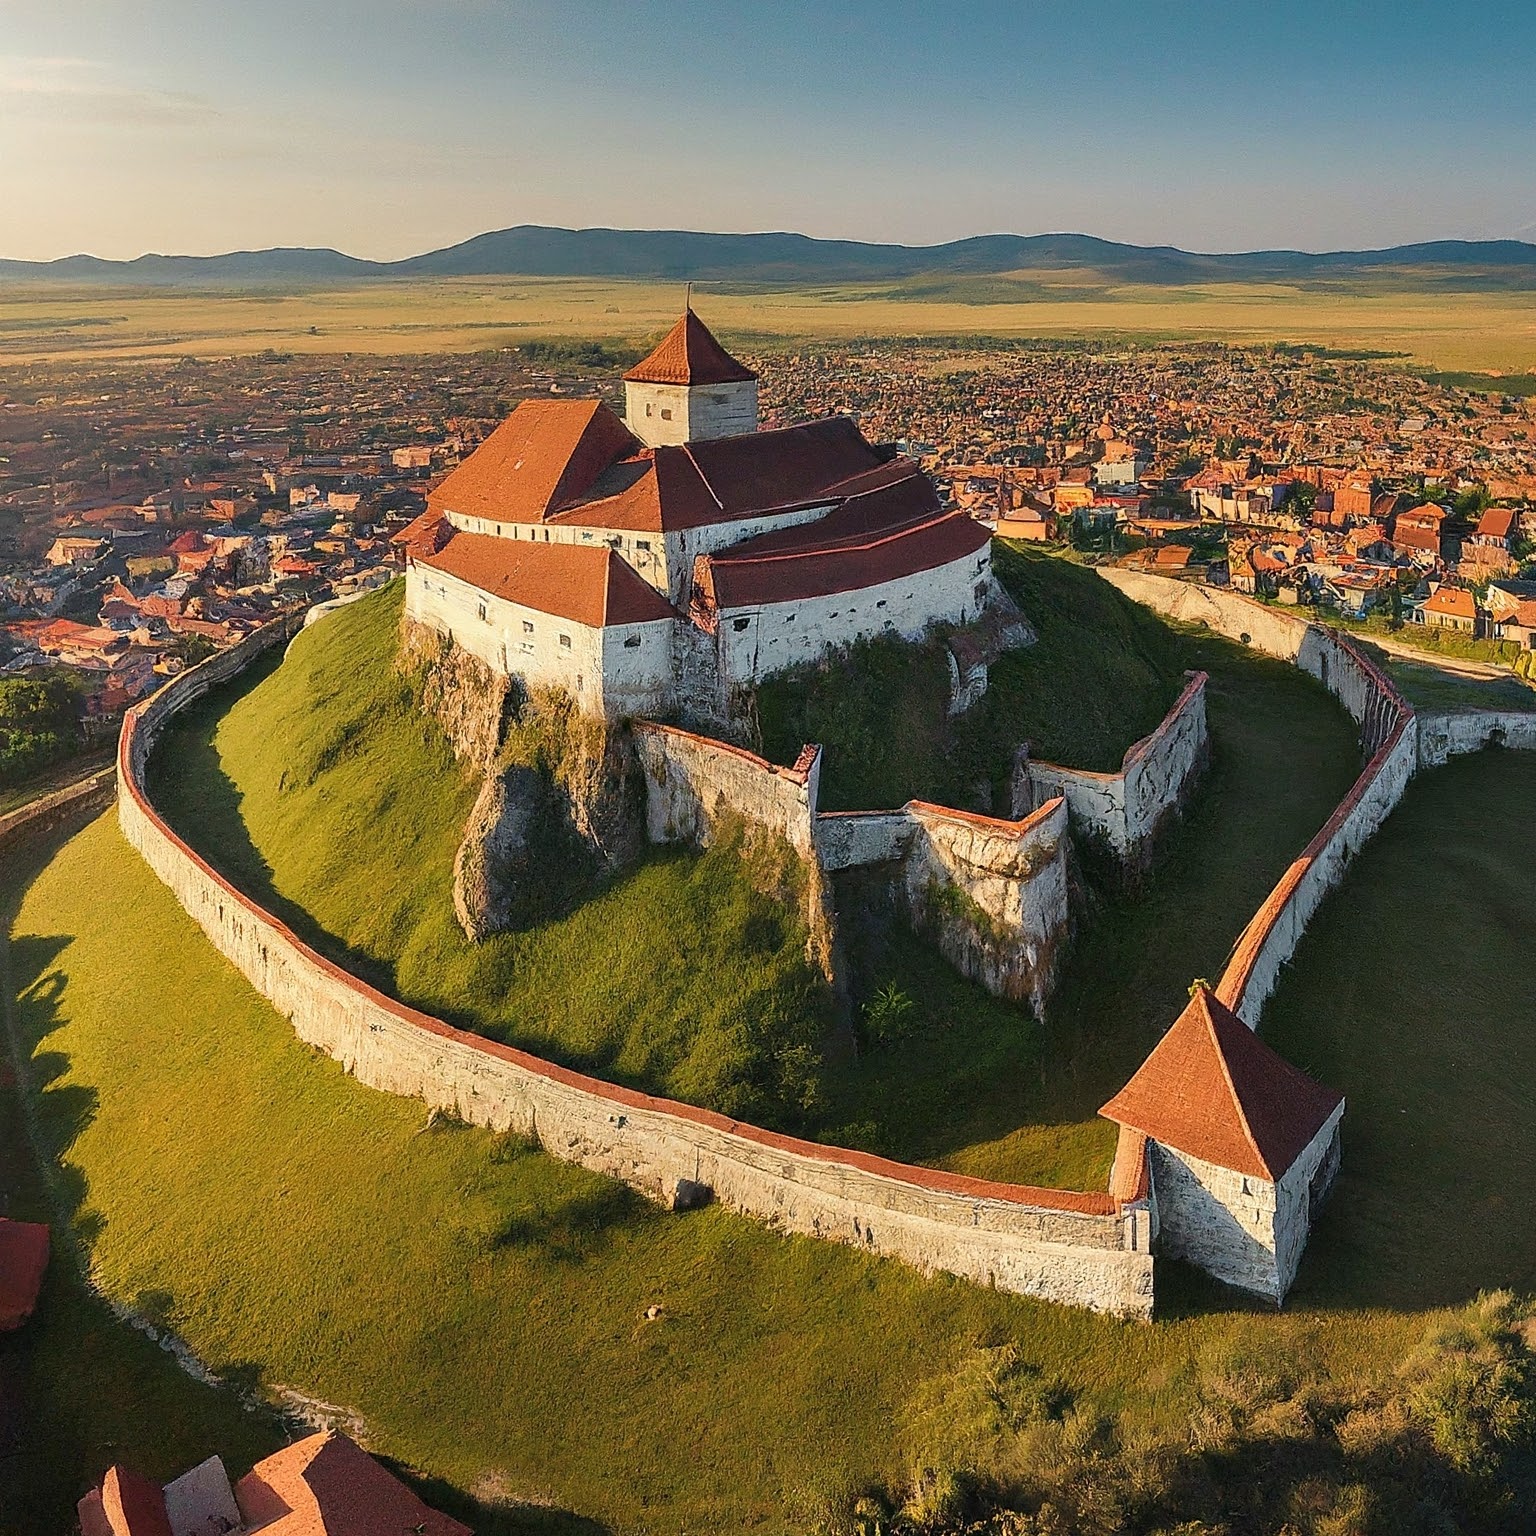 Bazna Fortress in Romania, a well-preserved medieval structure.